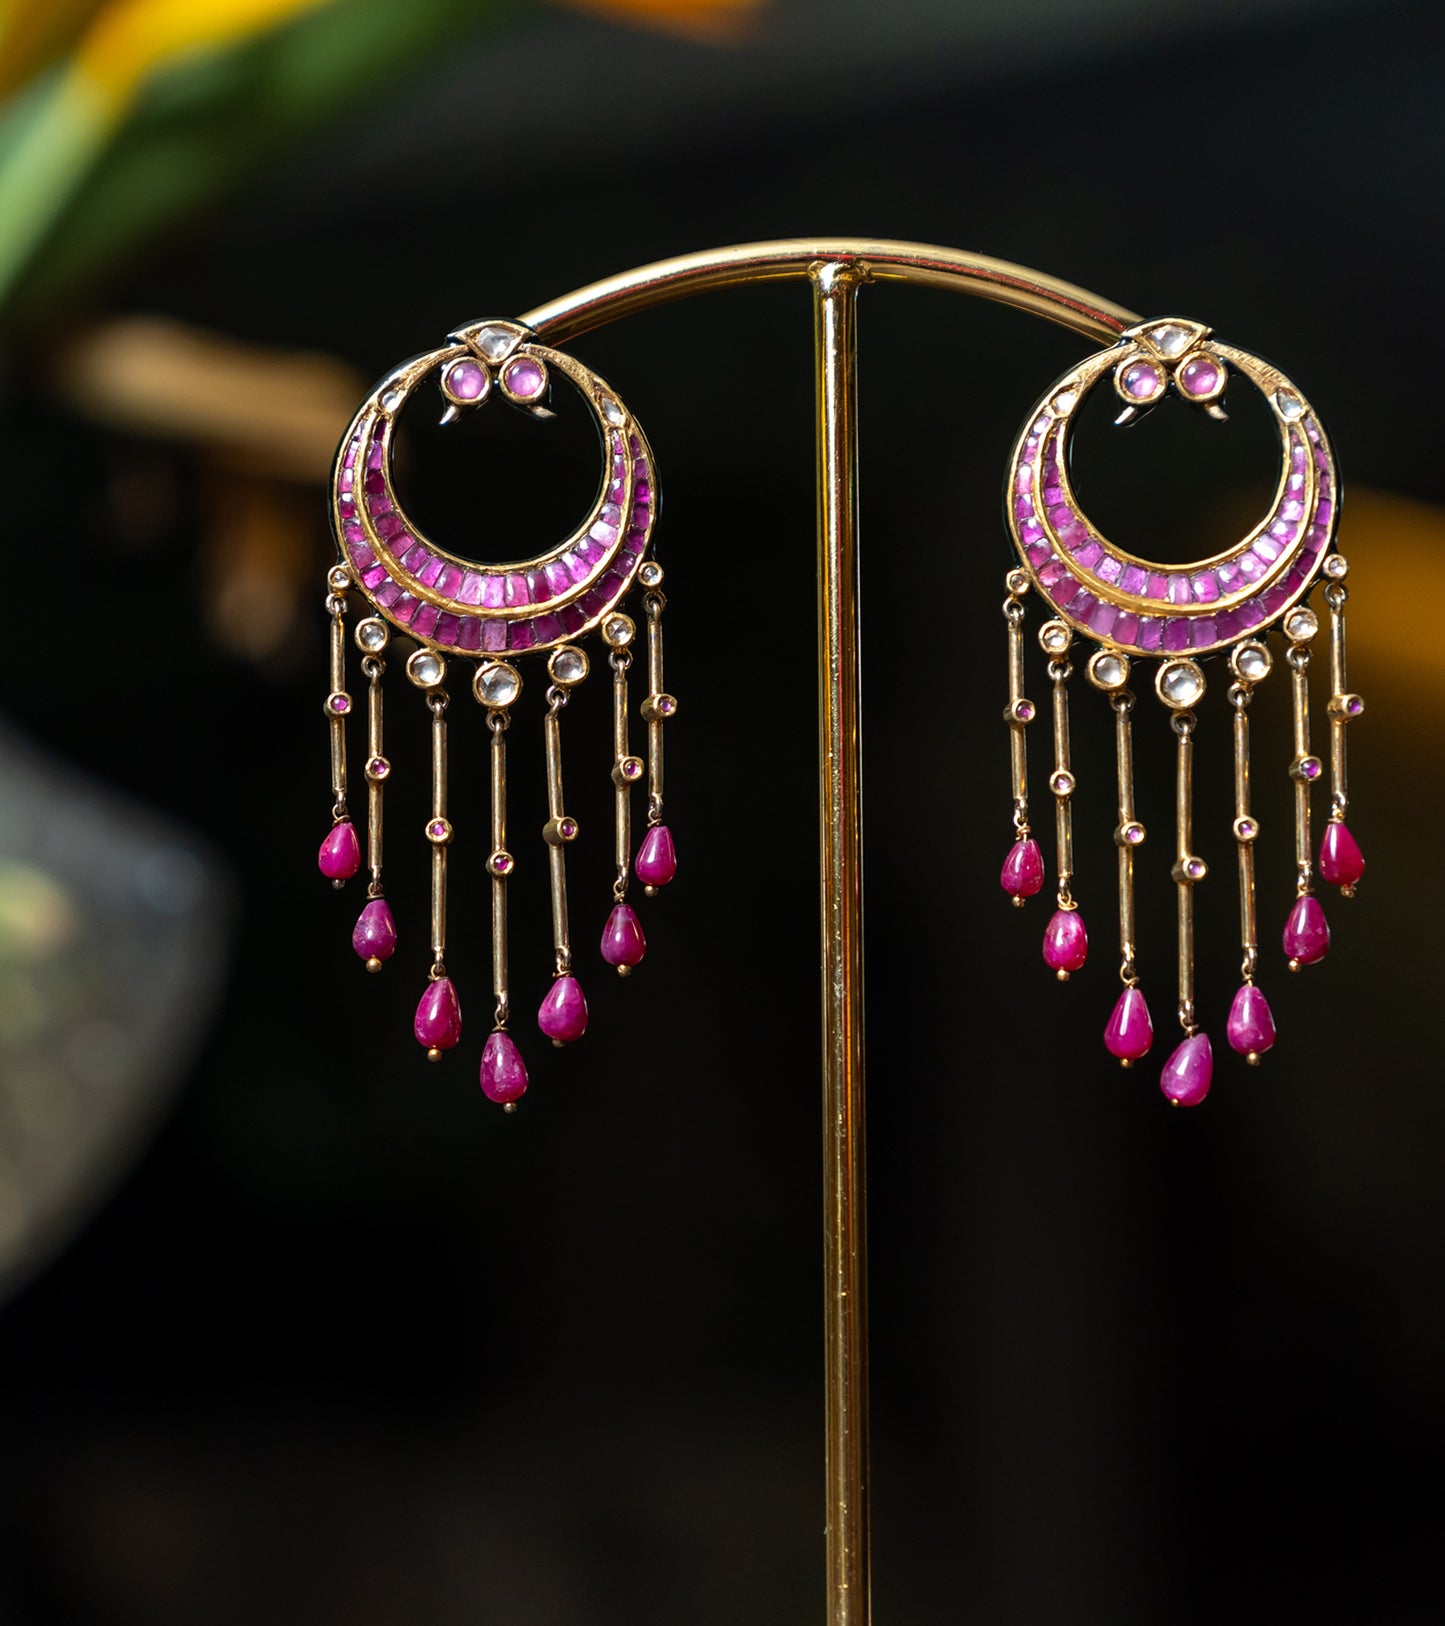 The Peacock Ruby Chandbalis in Gold-Festive Jewelry